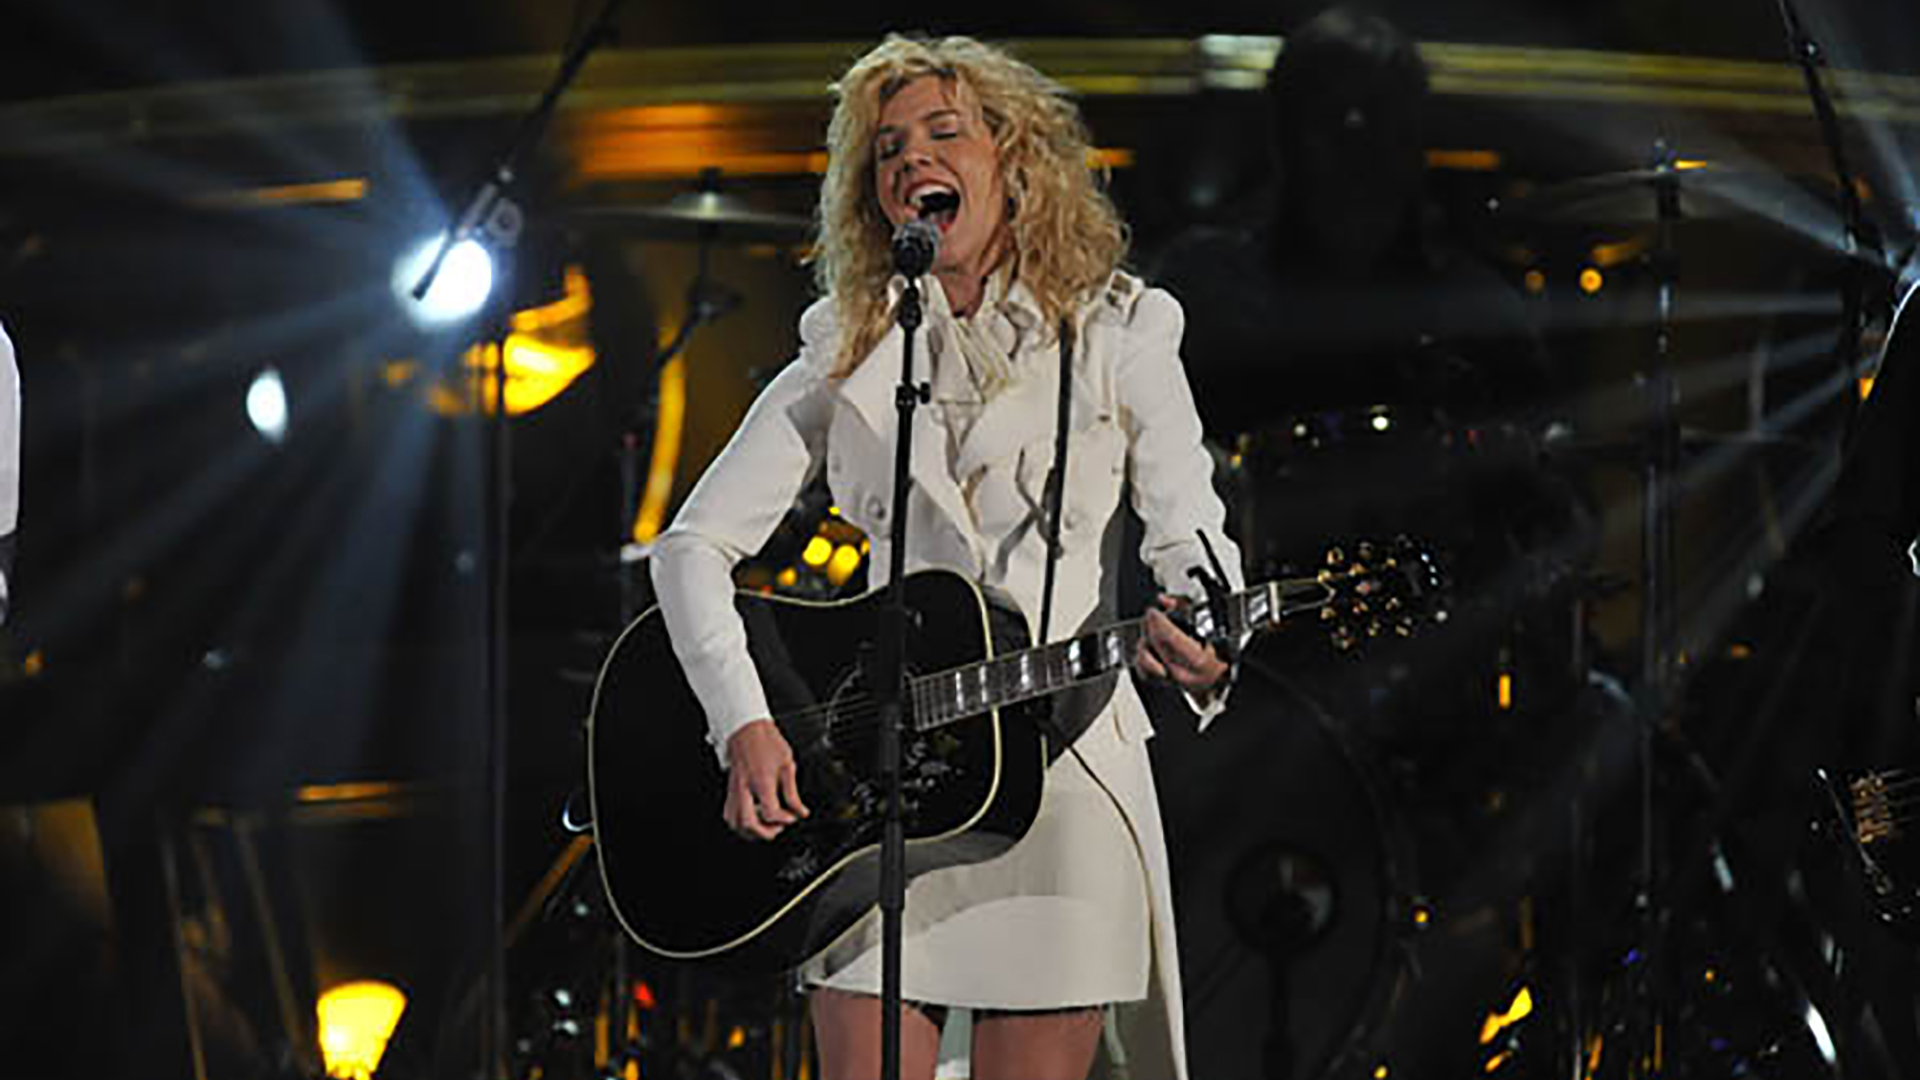 28. The Band Perry perform 